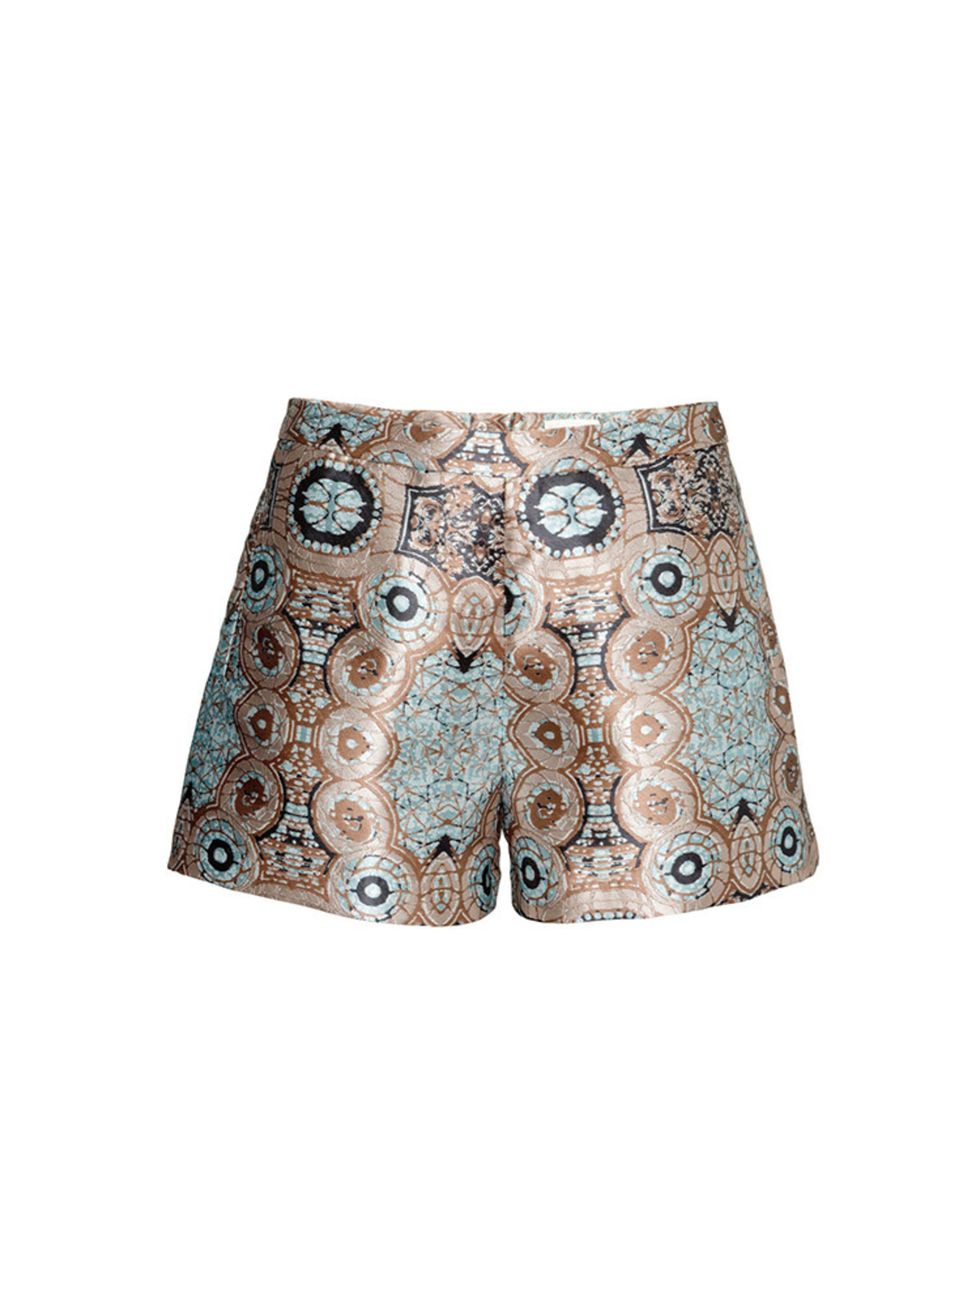 <p><a href="http://www.hm.com/gb/product/88575?article=88575-A" target="_blank">H&M</a> shorts, £19.99</p>